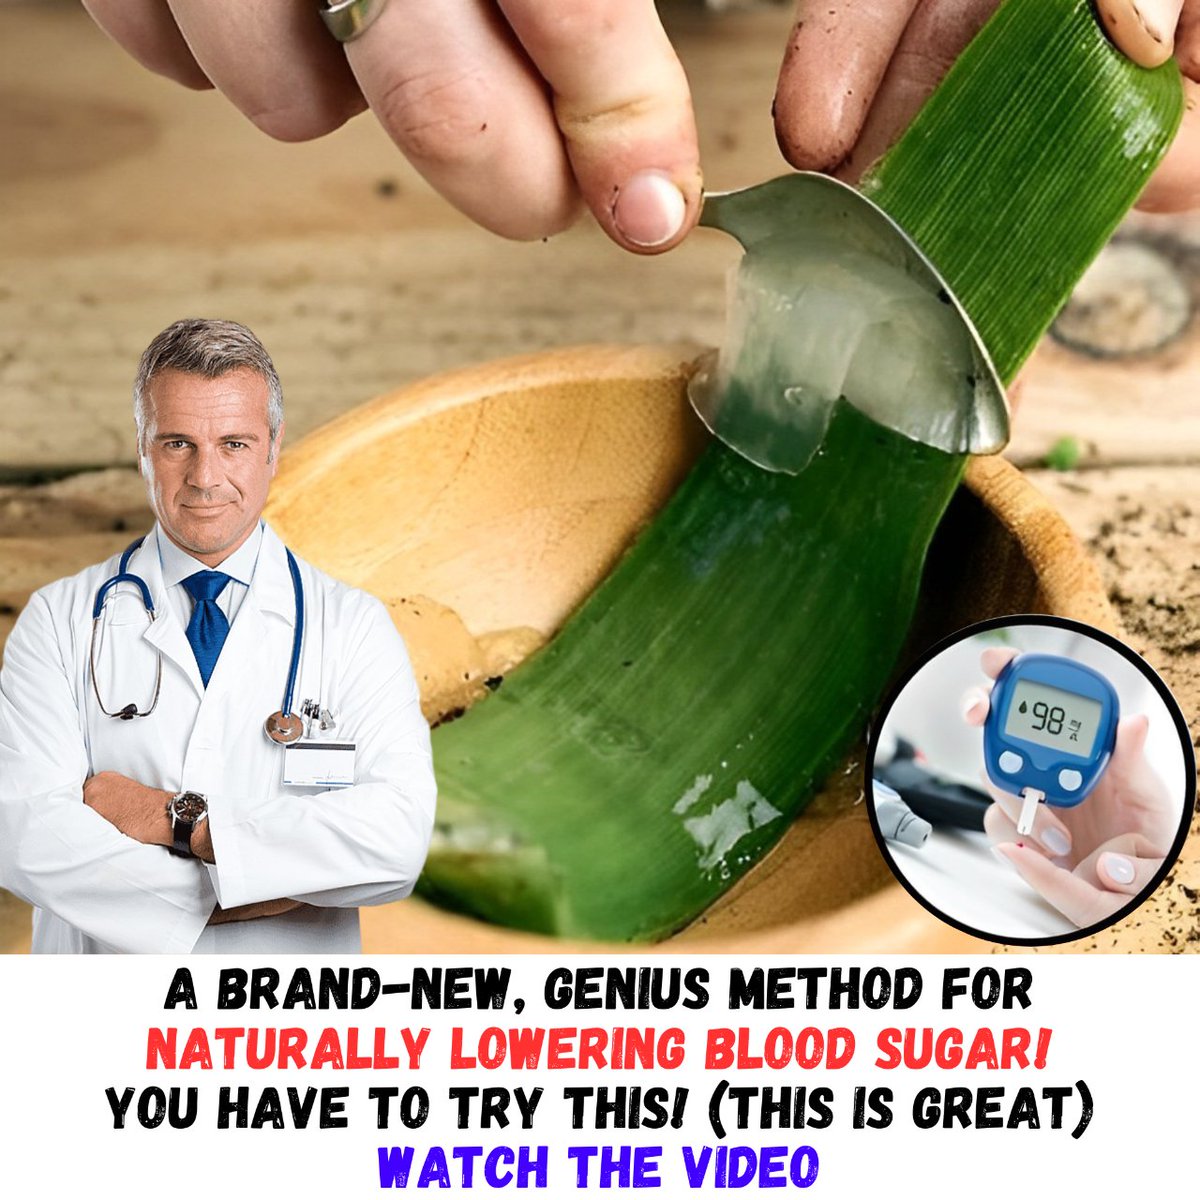 #diabetesmellitus #diabetesfriendly #diabetes2
#diabetesdiet #life #diabetestype #diabeteslife 
#diabetestype2 #bloodsugar #health #diabetes
Take charge of your blood sugar with this 
unique and natural approach.👇Click Now
👉 i.mtr.cool/ggolygtbmt 👈